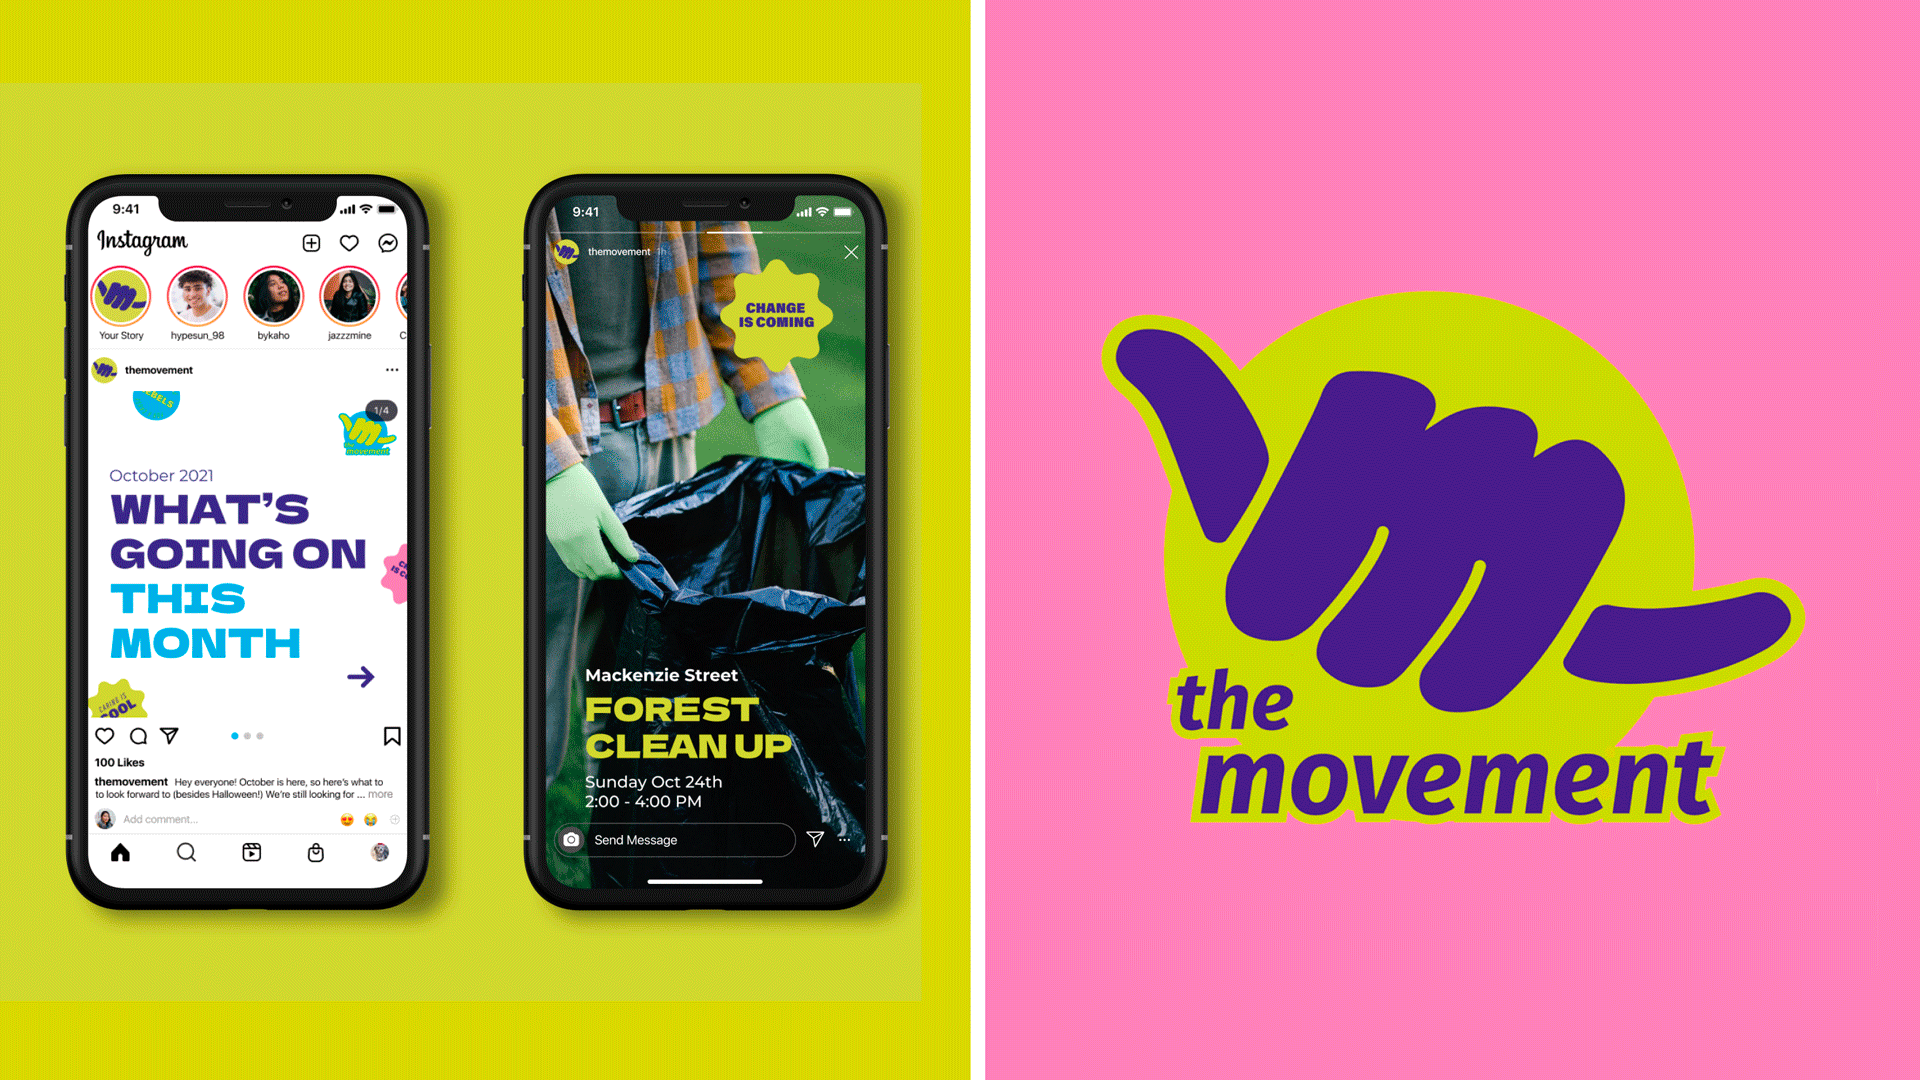 A gif split into two images showing social media content for The Movement, a youth centre centred around social good and volunteering. The image on the right features two smartphones displaying instagram posts against a yellow background. The image on the right shows the company’s logo, a hang loose sign with the m forming the hands knuckles surrounded by a coloured outline. This image alternates between different colour variations of the logo. The first has a pink background, a dark purple logo and a yellow outline. The second shows a blue background, a dark purple logo and a pink outline. The last shows a dark purple background, a yellow logo and a blue outline.